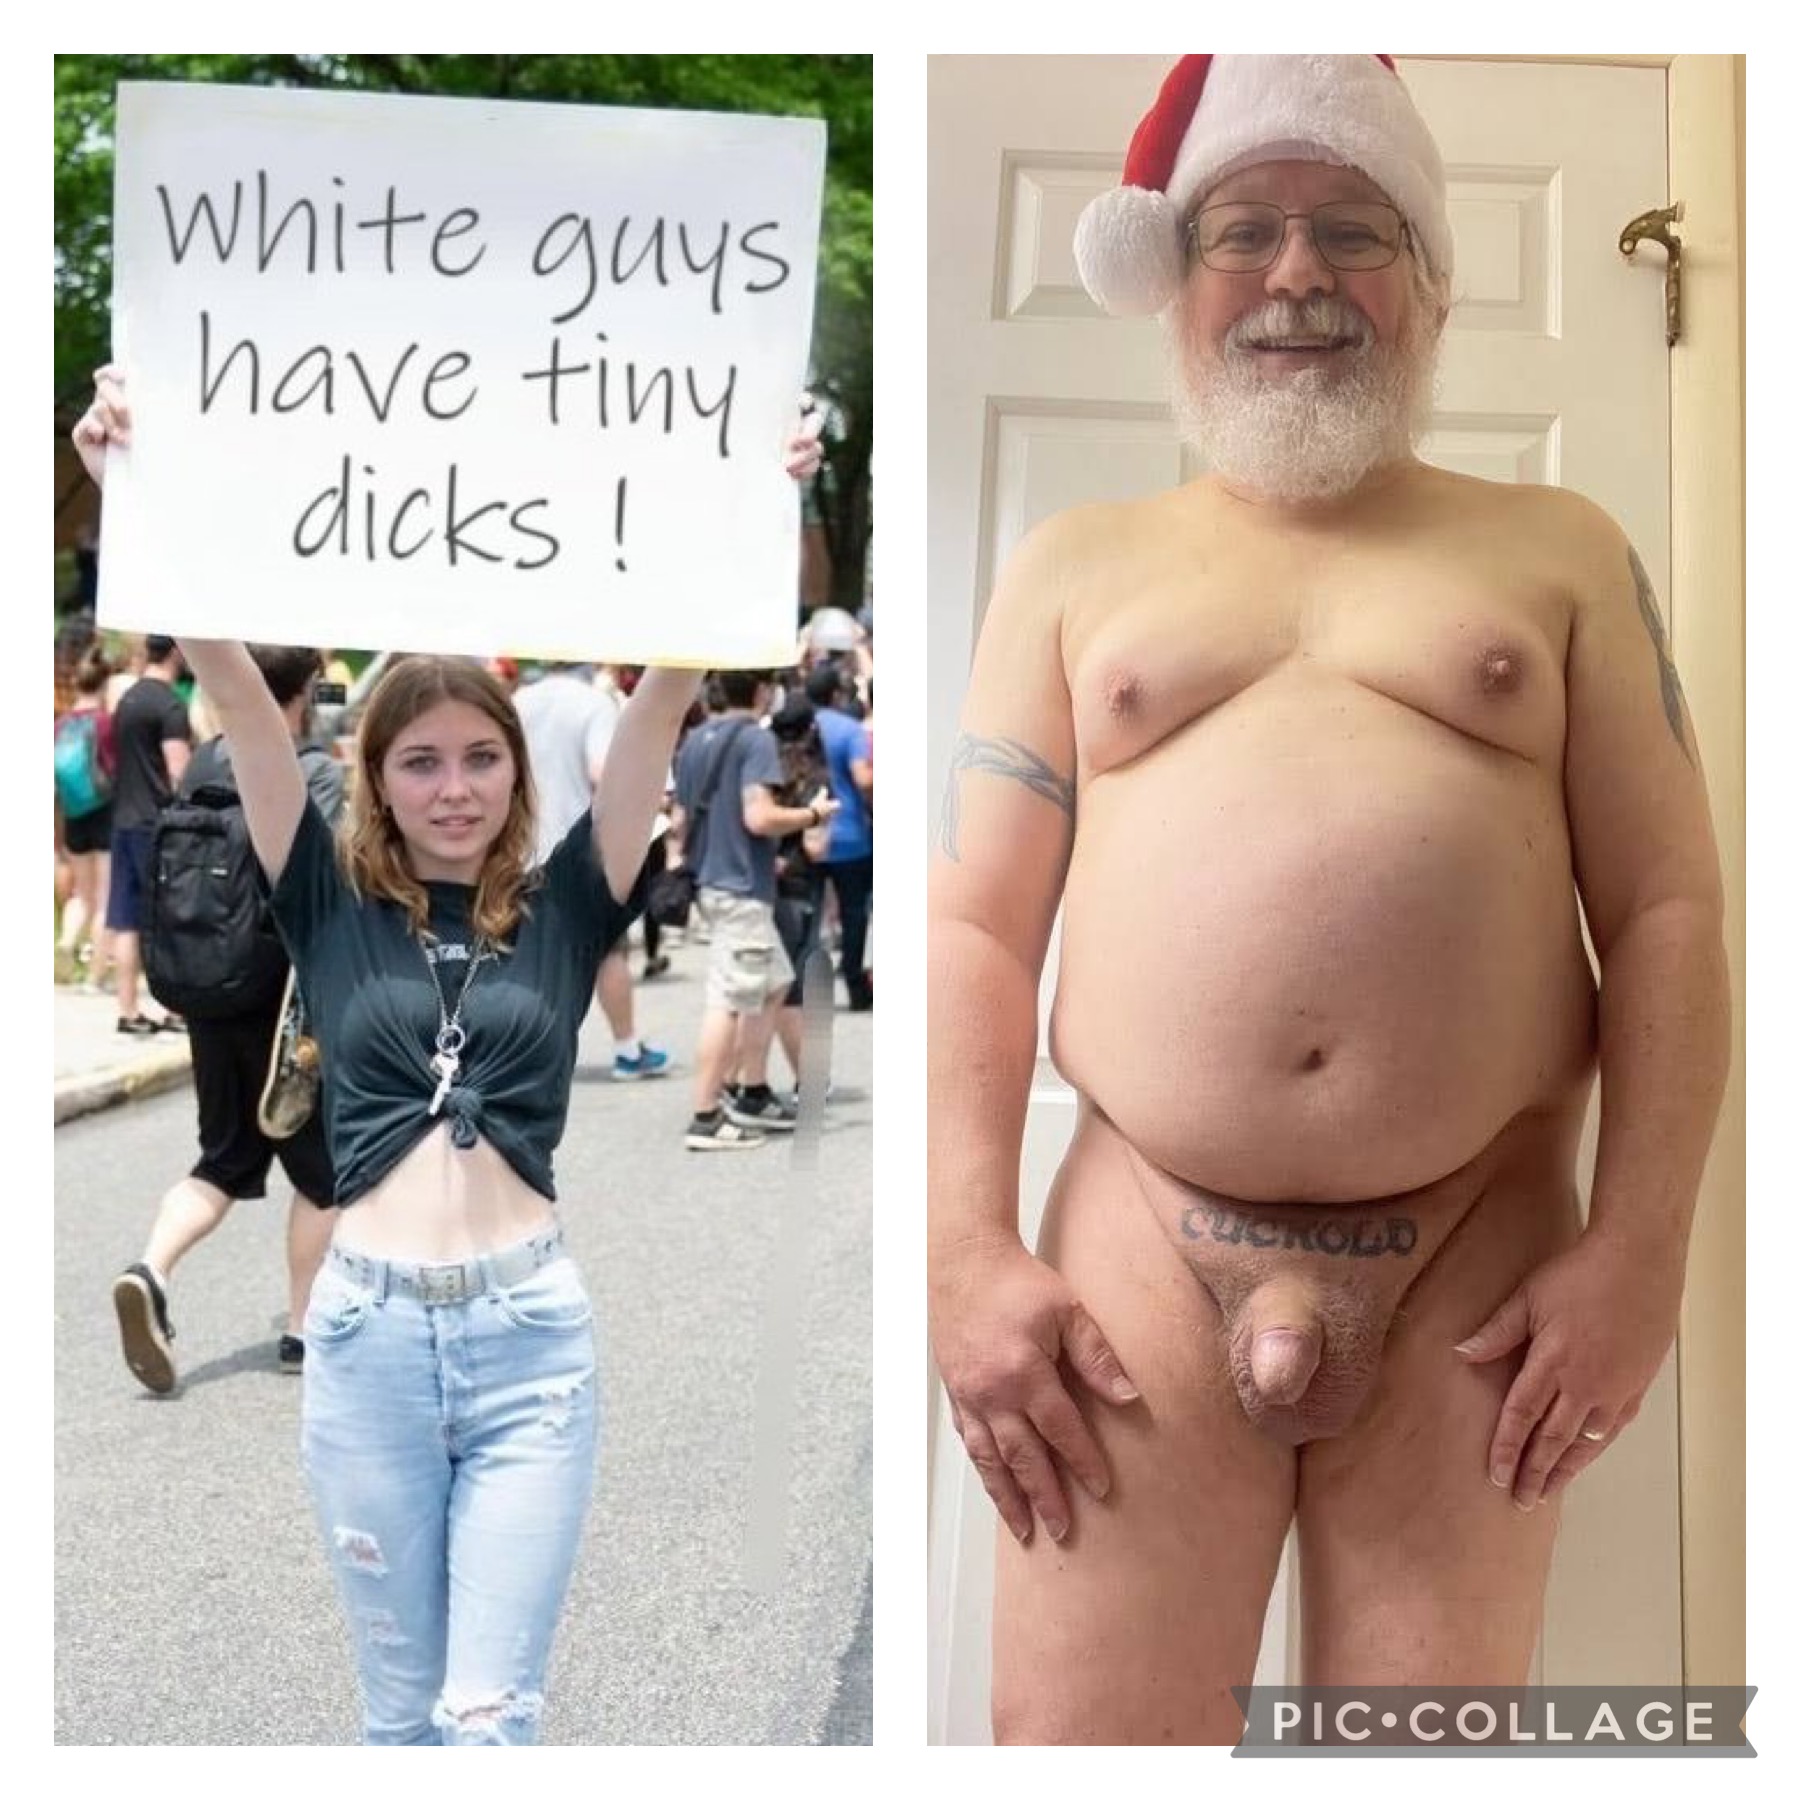 Santa Claus is a cuckold with a tiny dick